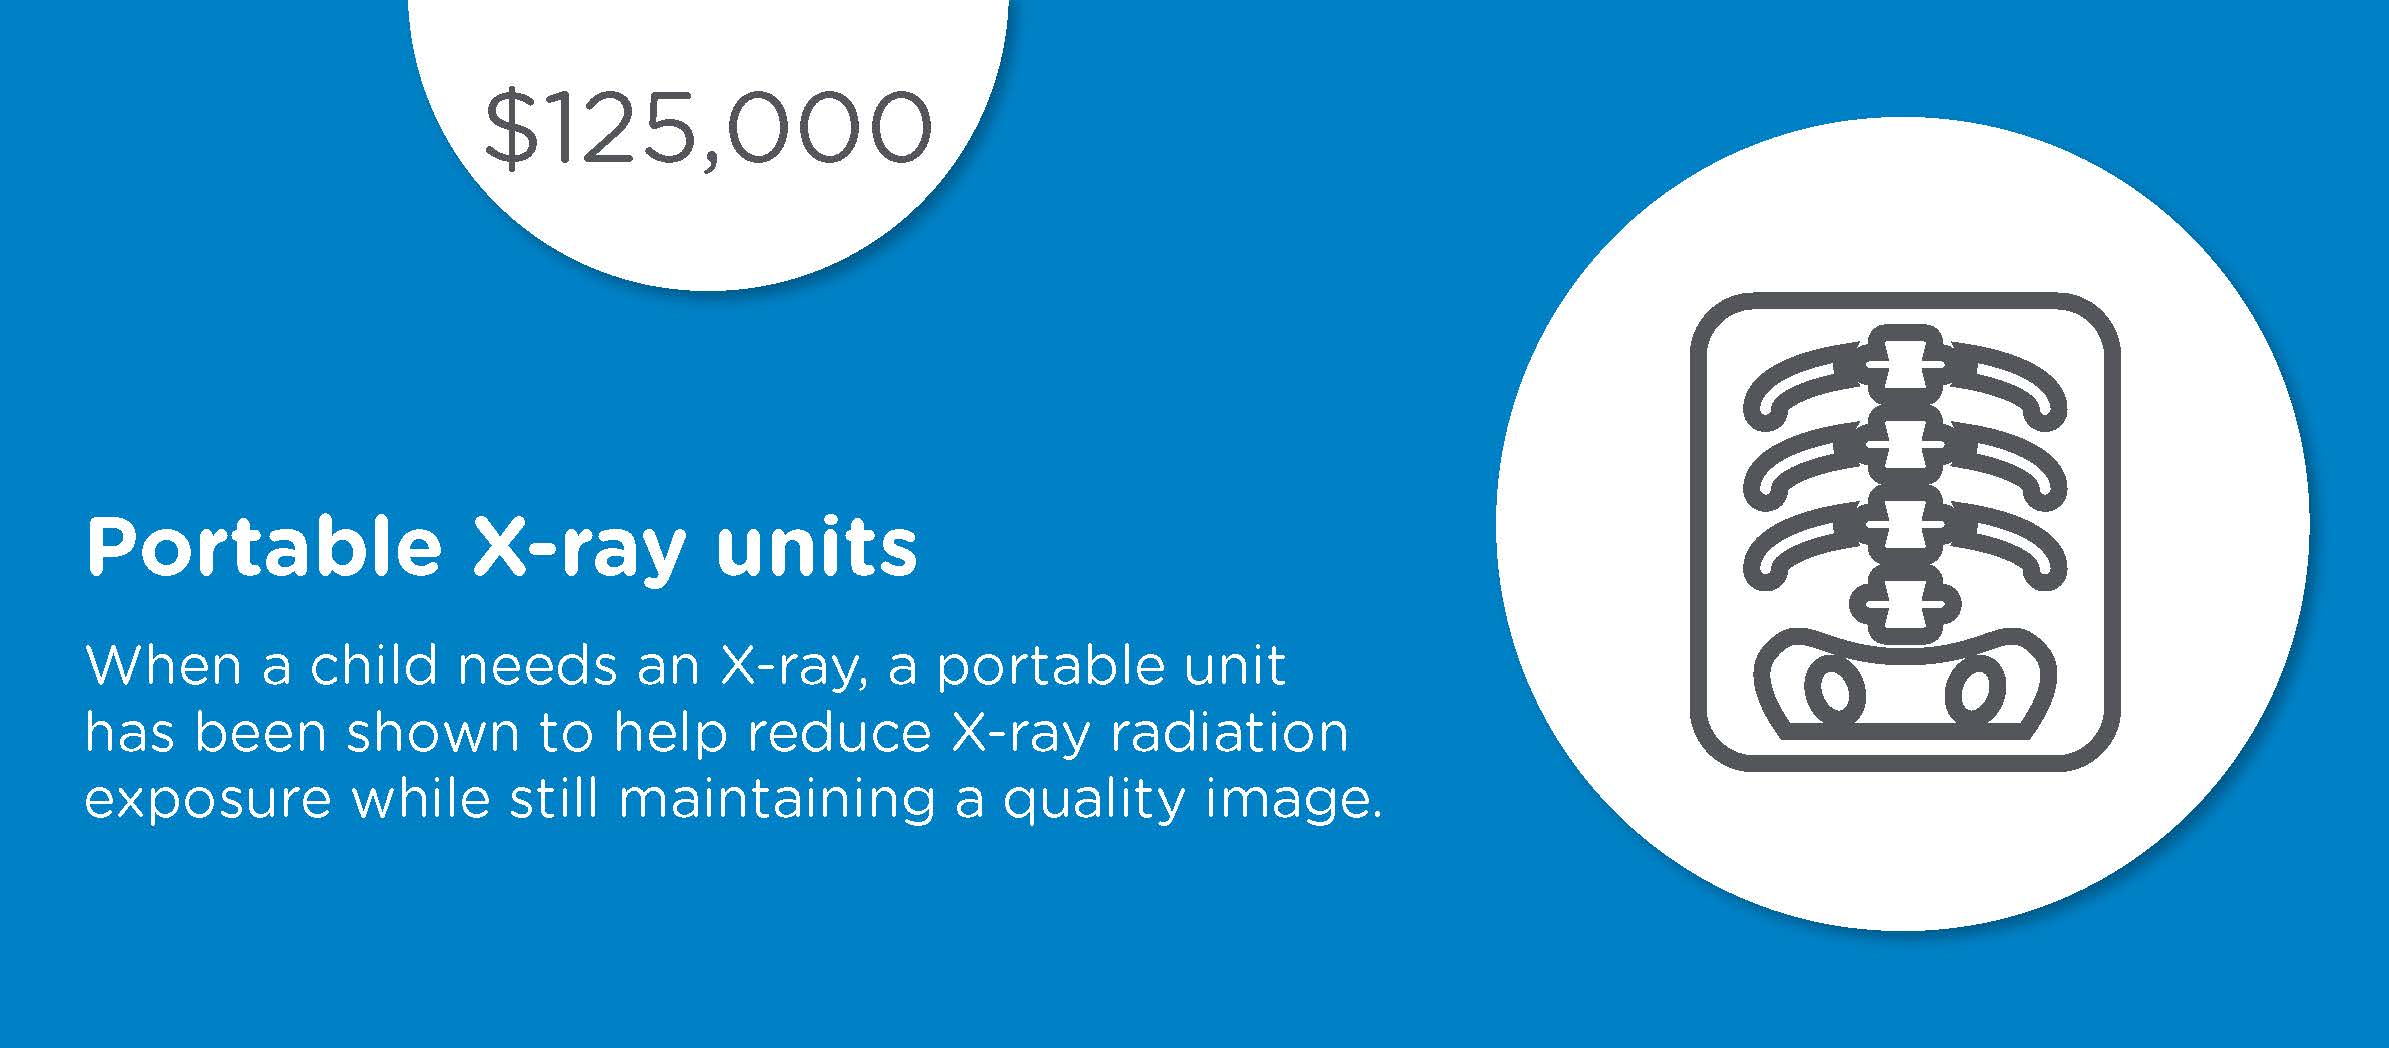 cost of portable xray units